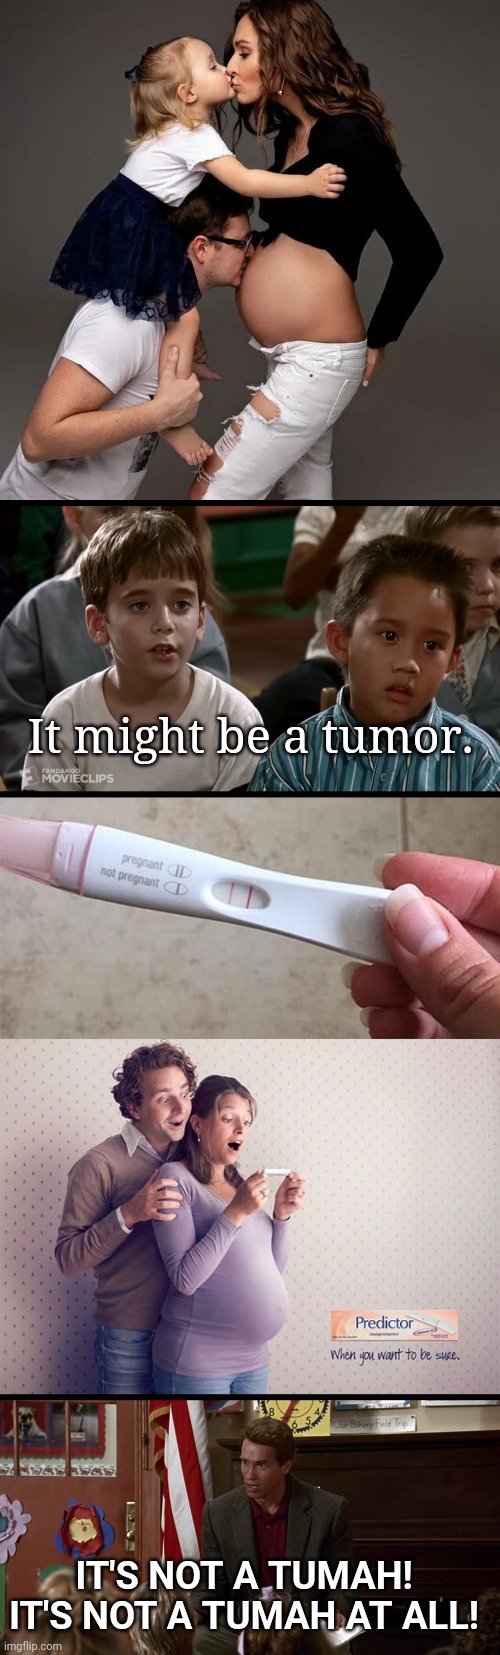 Don't test my patience. | It might be a tumor. IT'S NOT A TUMAH! IT'S NOT A TUMAH AT ALL! | image tagged in pregnancy | made w/ Imgflip meme maker